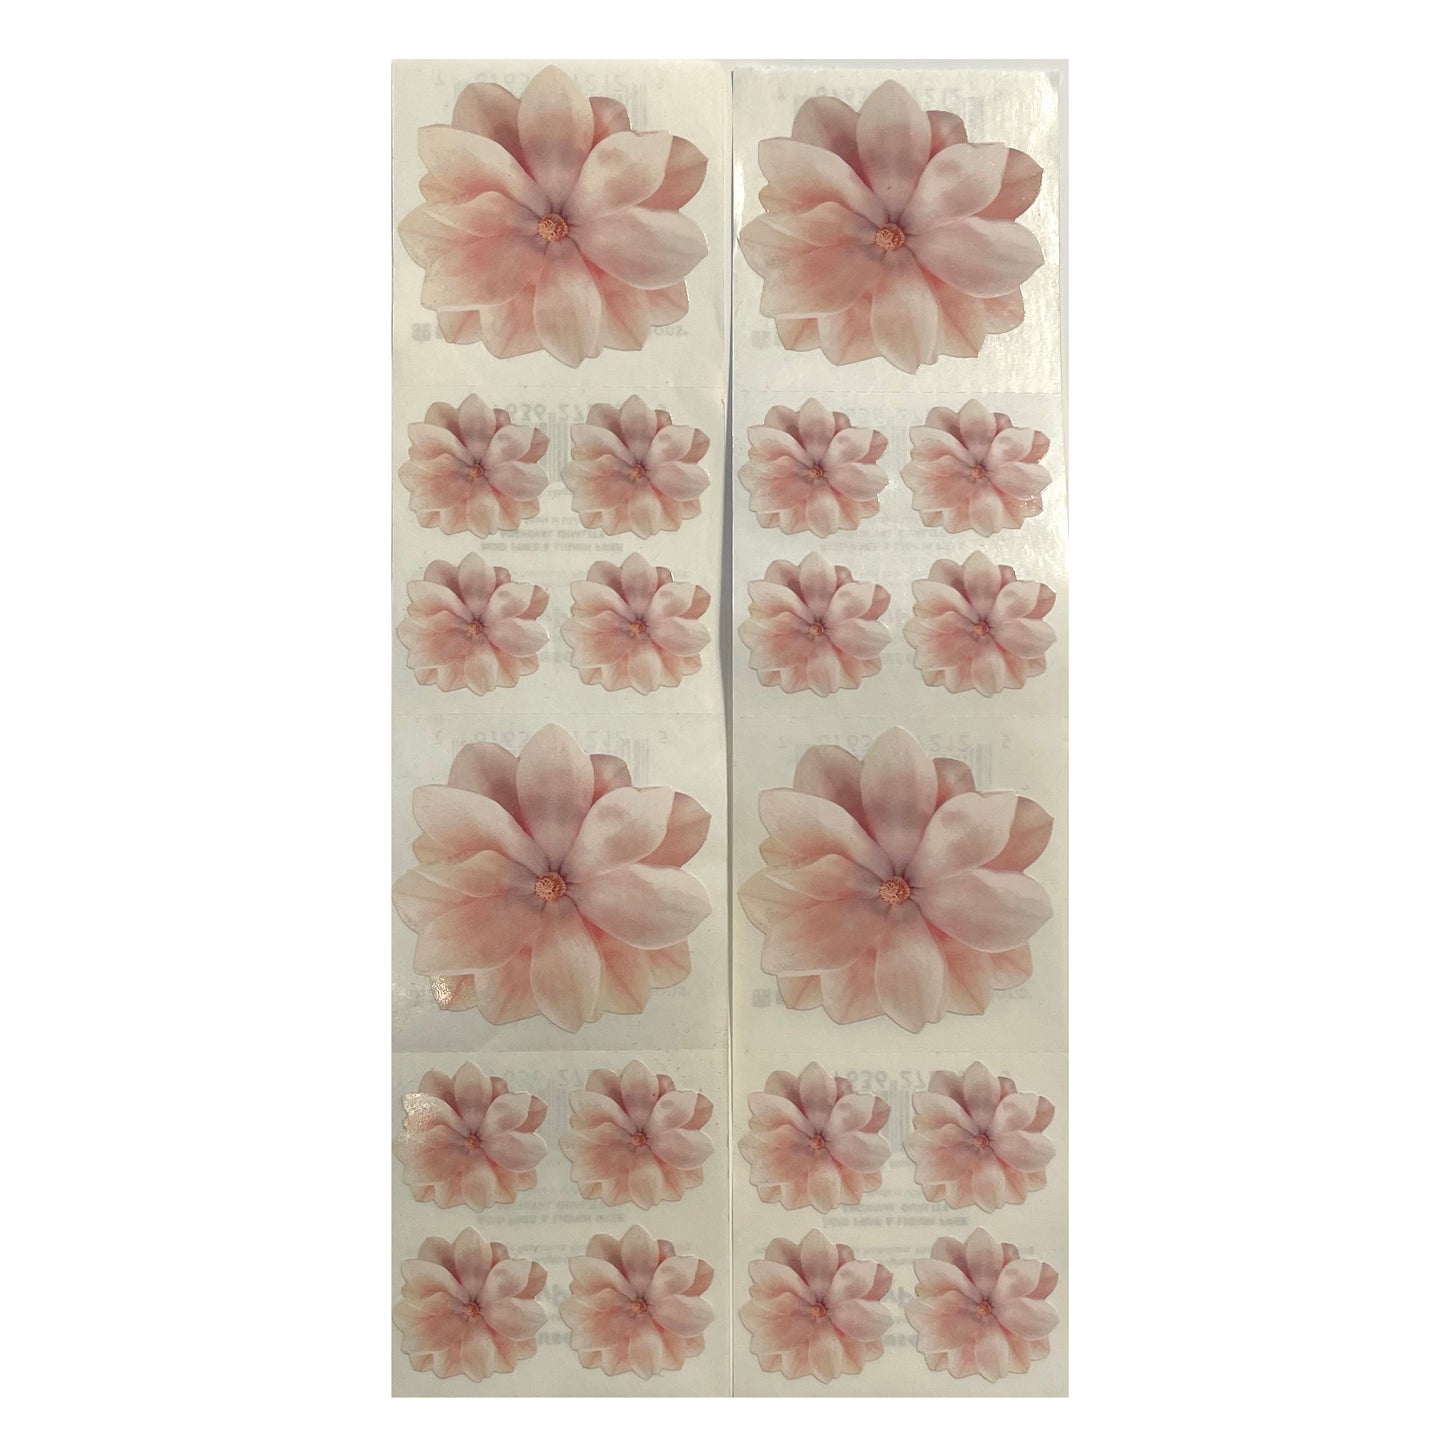 Paper House: Photoreal Pink Gardenia Flower Stickers - 8 pcs